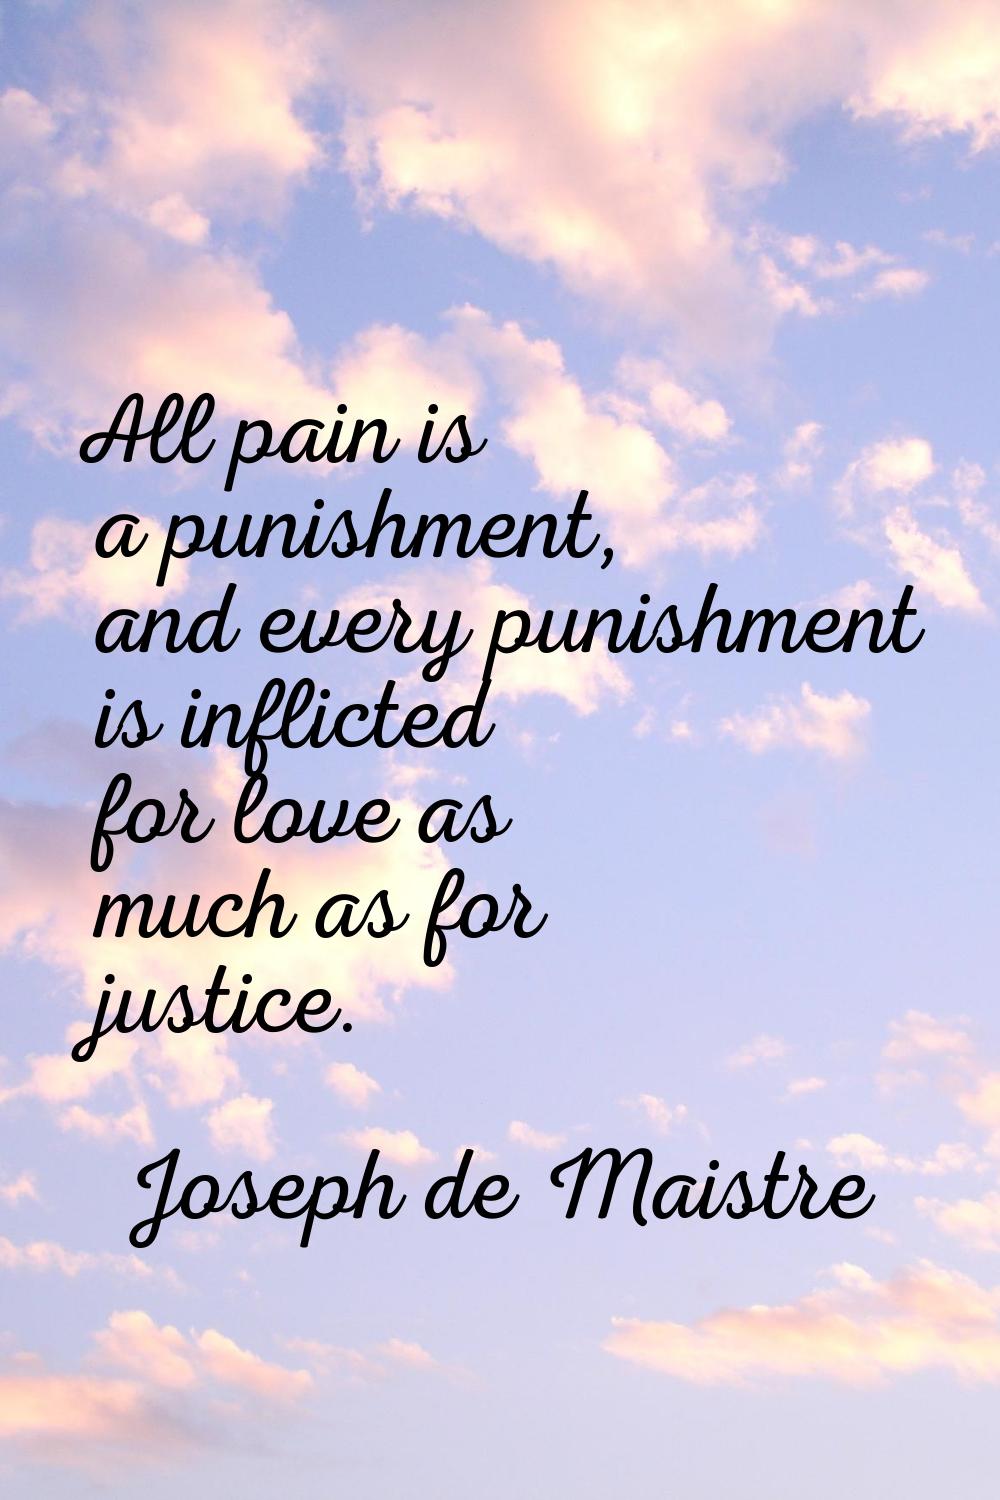 All pain is a punishment, and every punishment is inflicted for love as much as for justice.